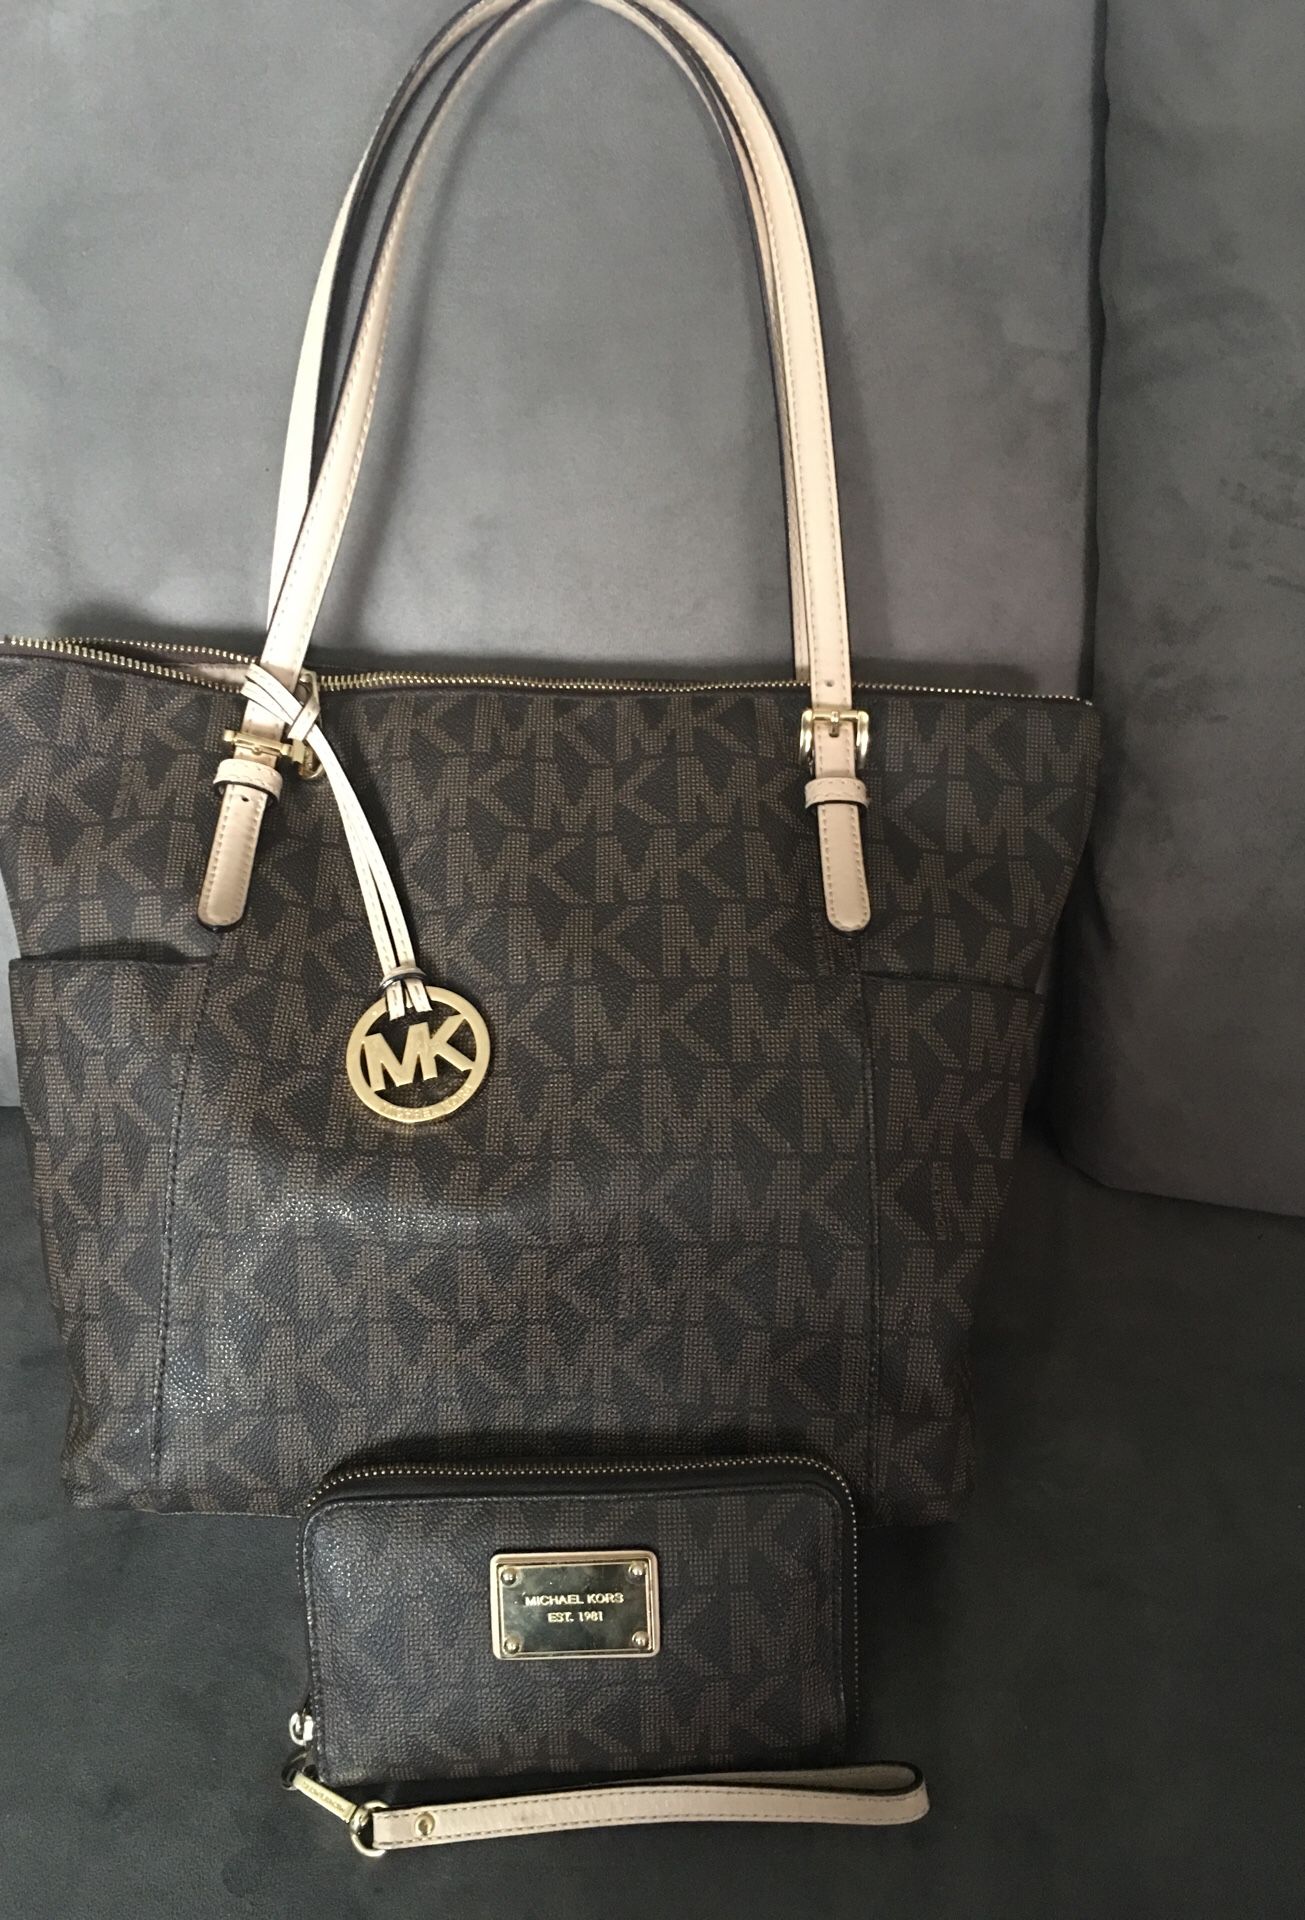 Michael kors purse and wristlet very good condition used only a few months